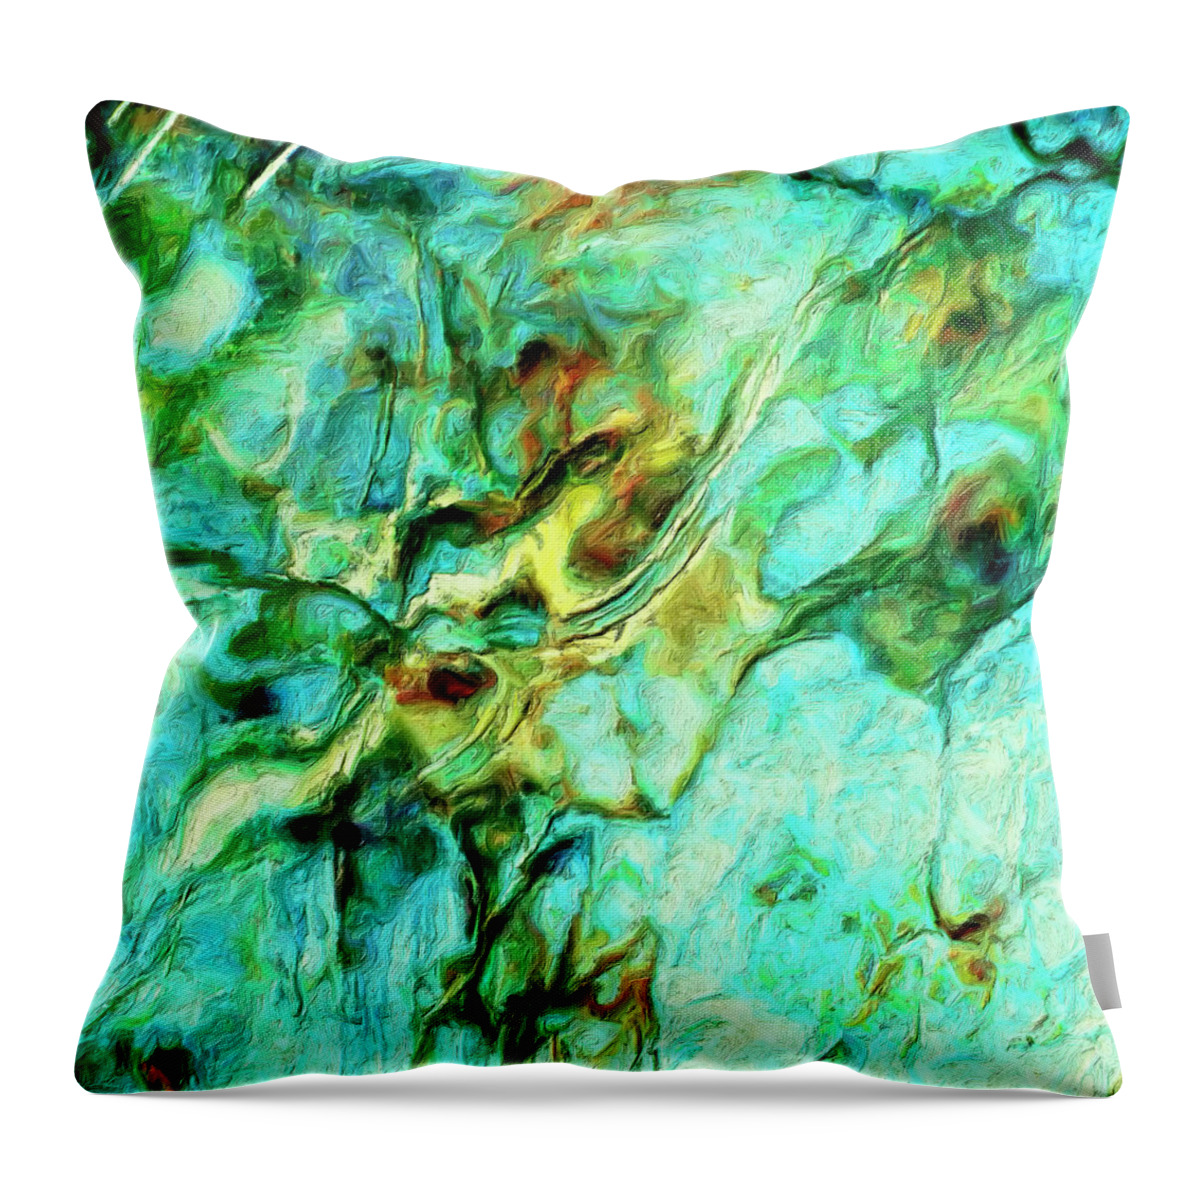 Abstract Throw Pillow featuring the painting Amazon by Dominic Piperata